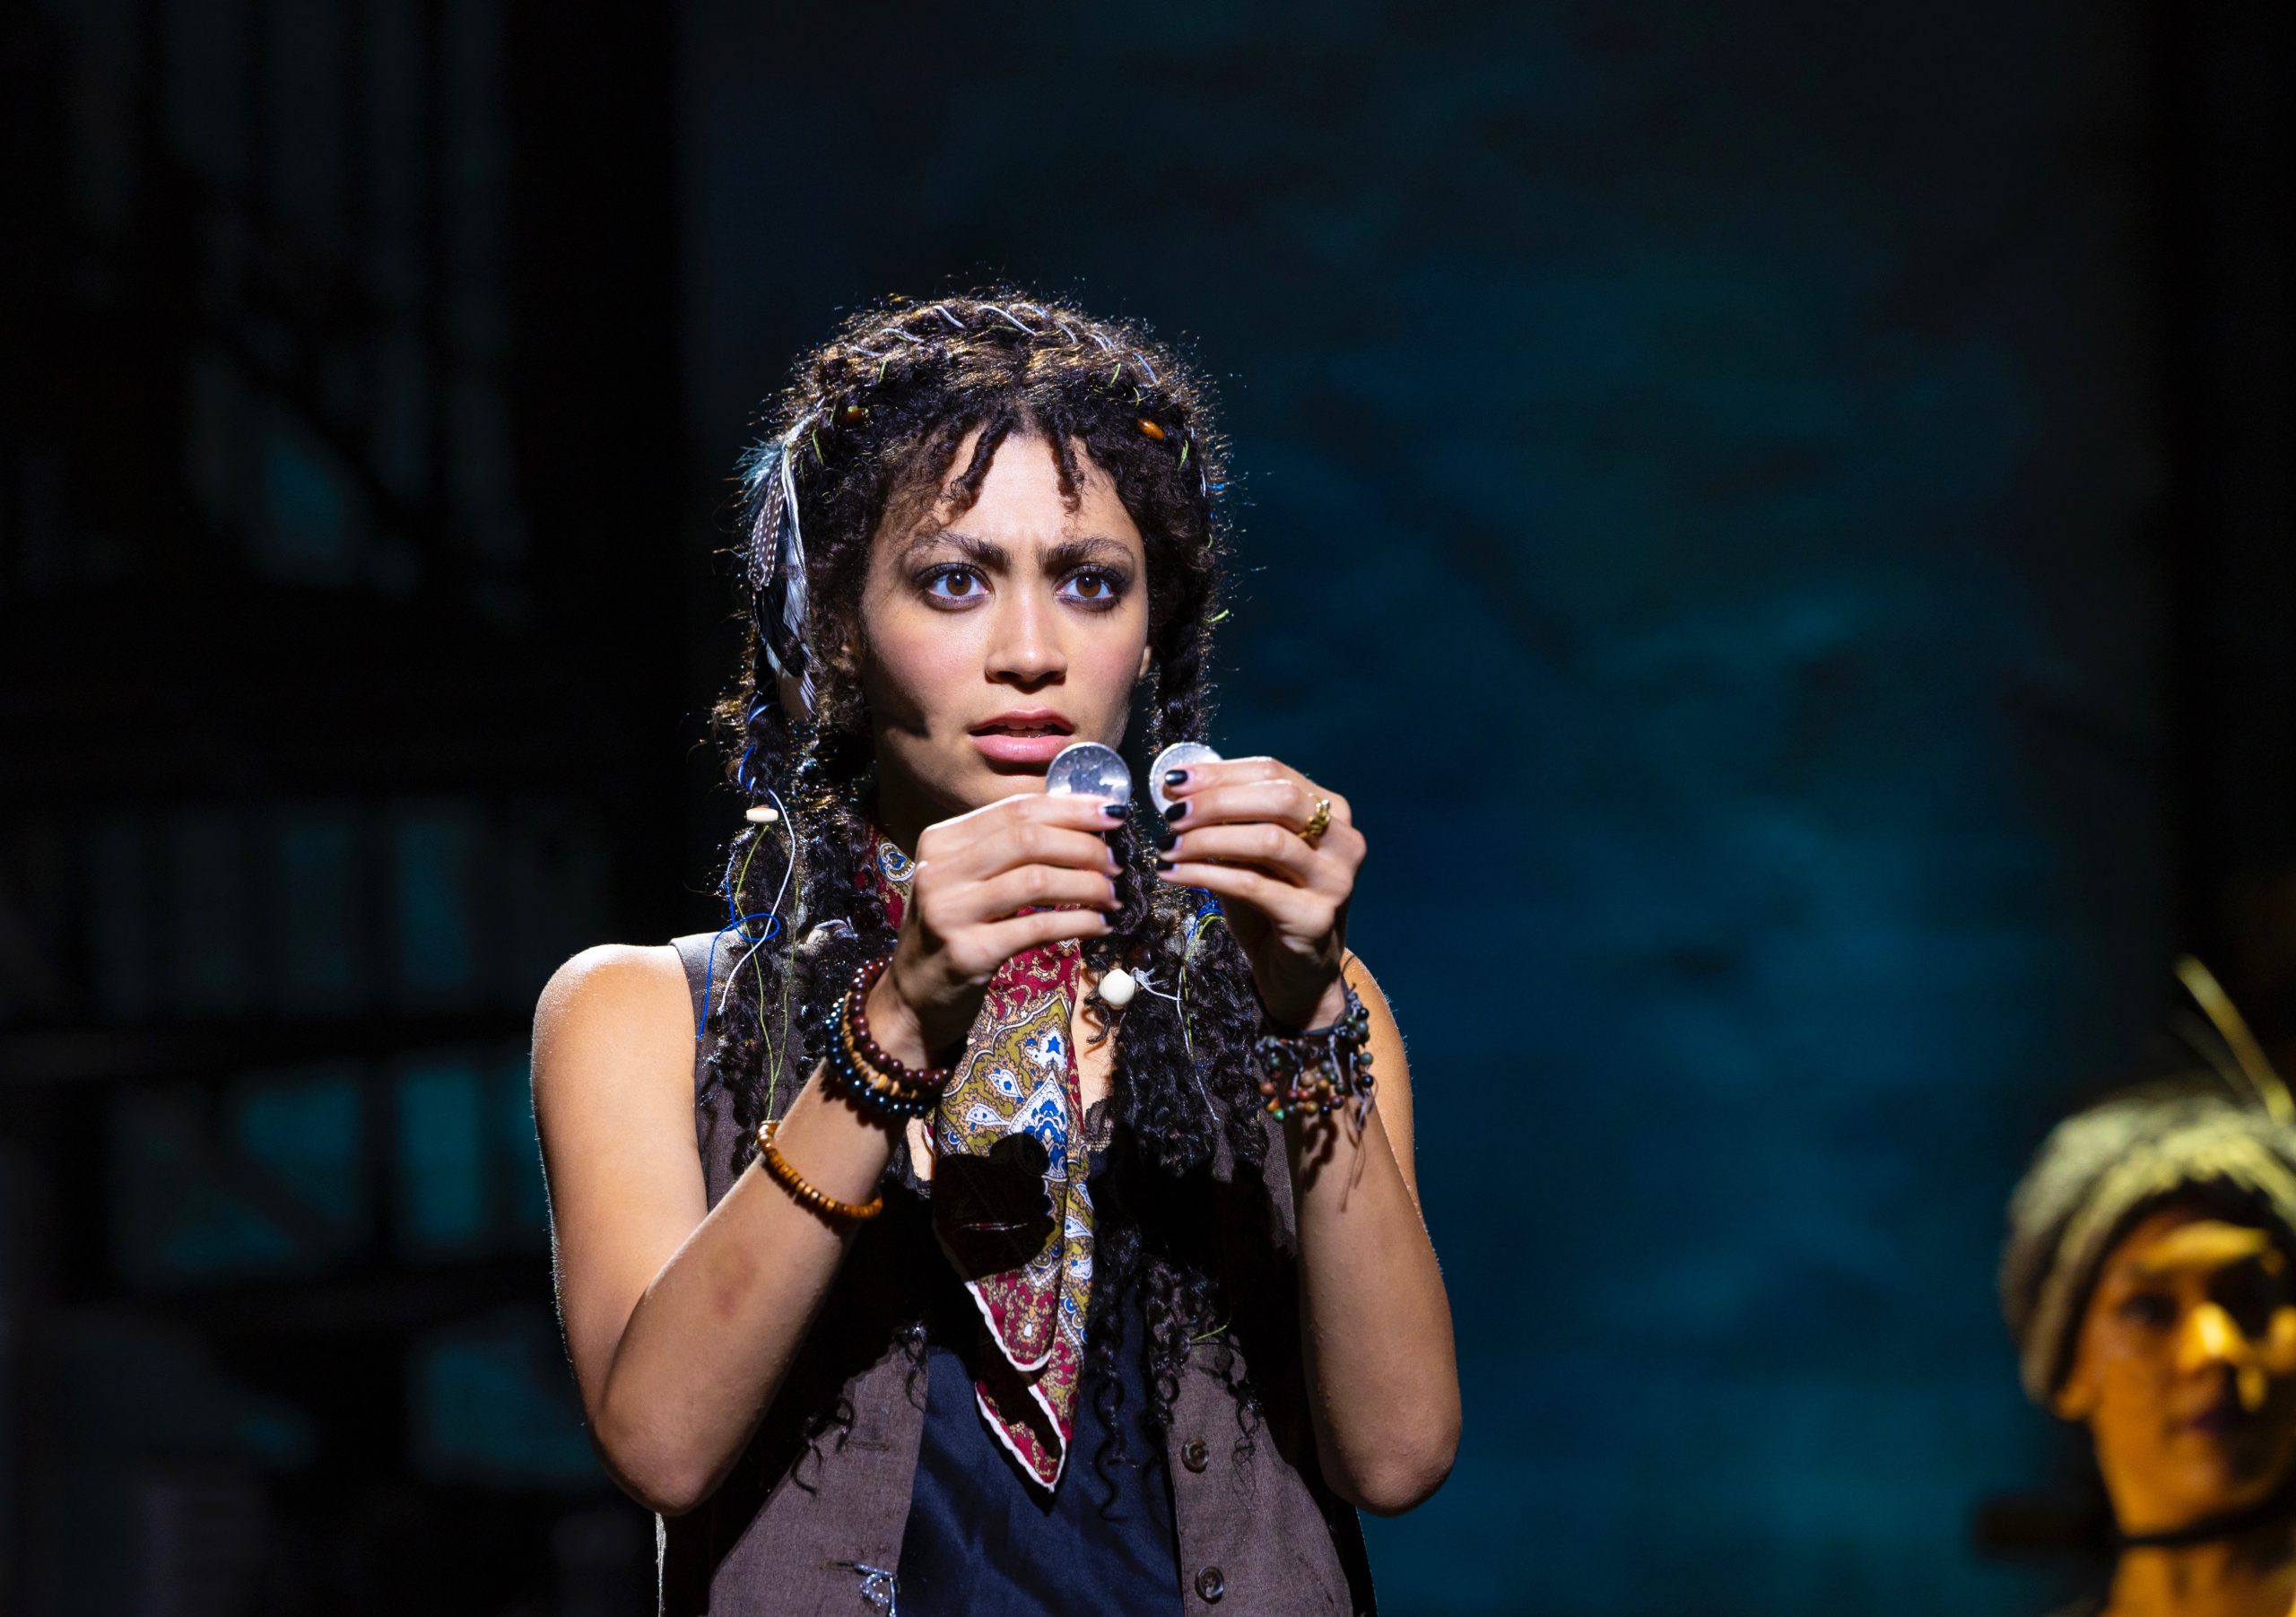 While Orpheus tries to save her, Eurydice barely has two nickels to rub together, but she's working on it. Pittsburghers will see Hannah Whitley as the female lead in the 'Hadestown' tour. Photo: T Charles Erickson